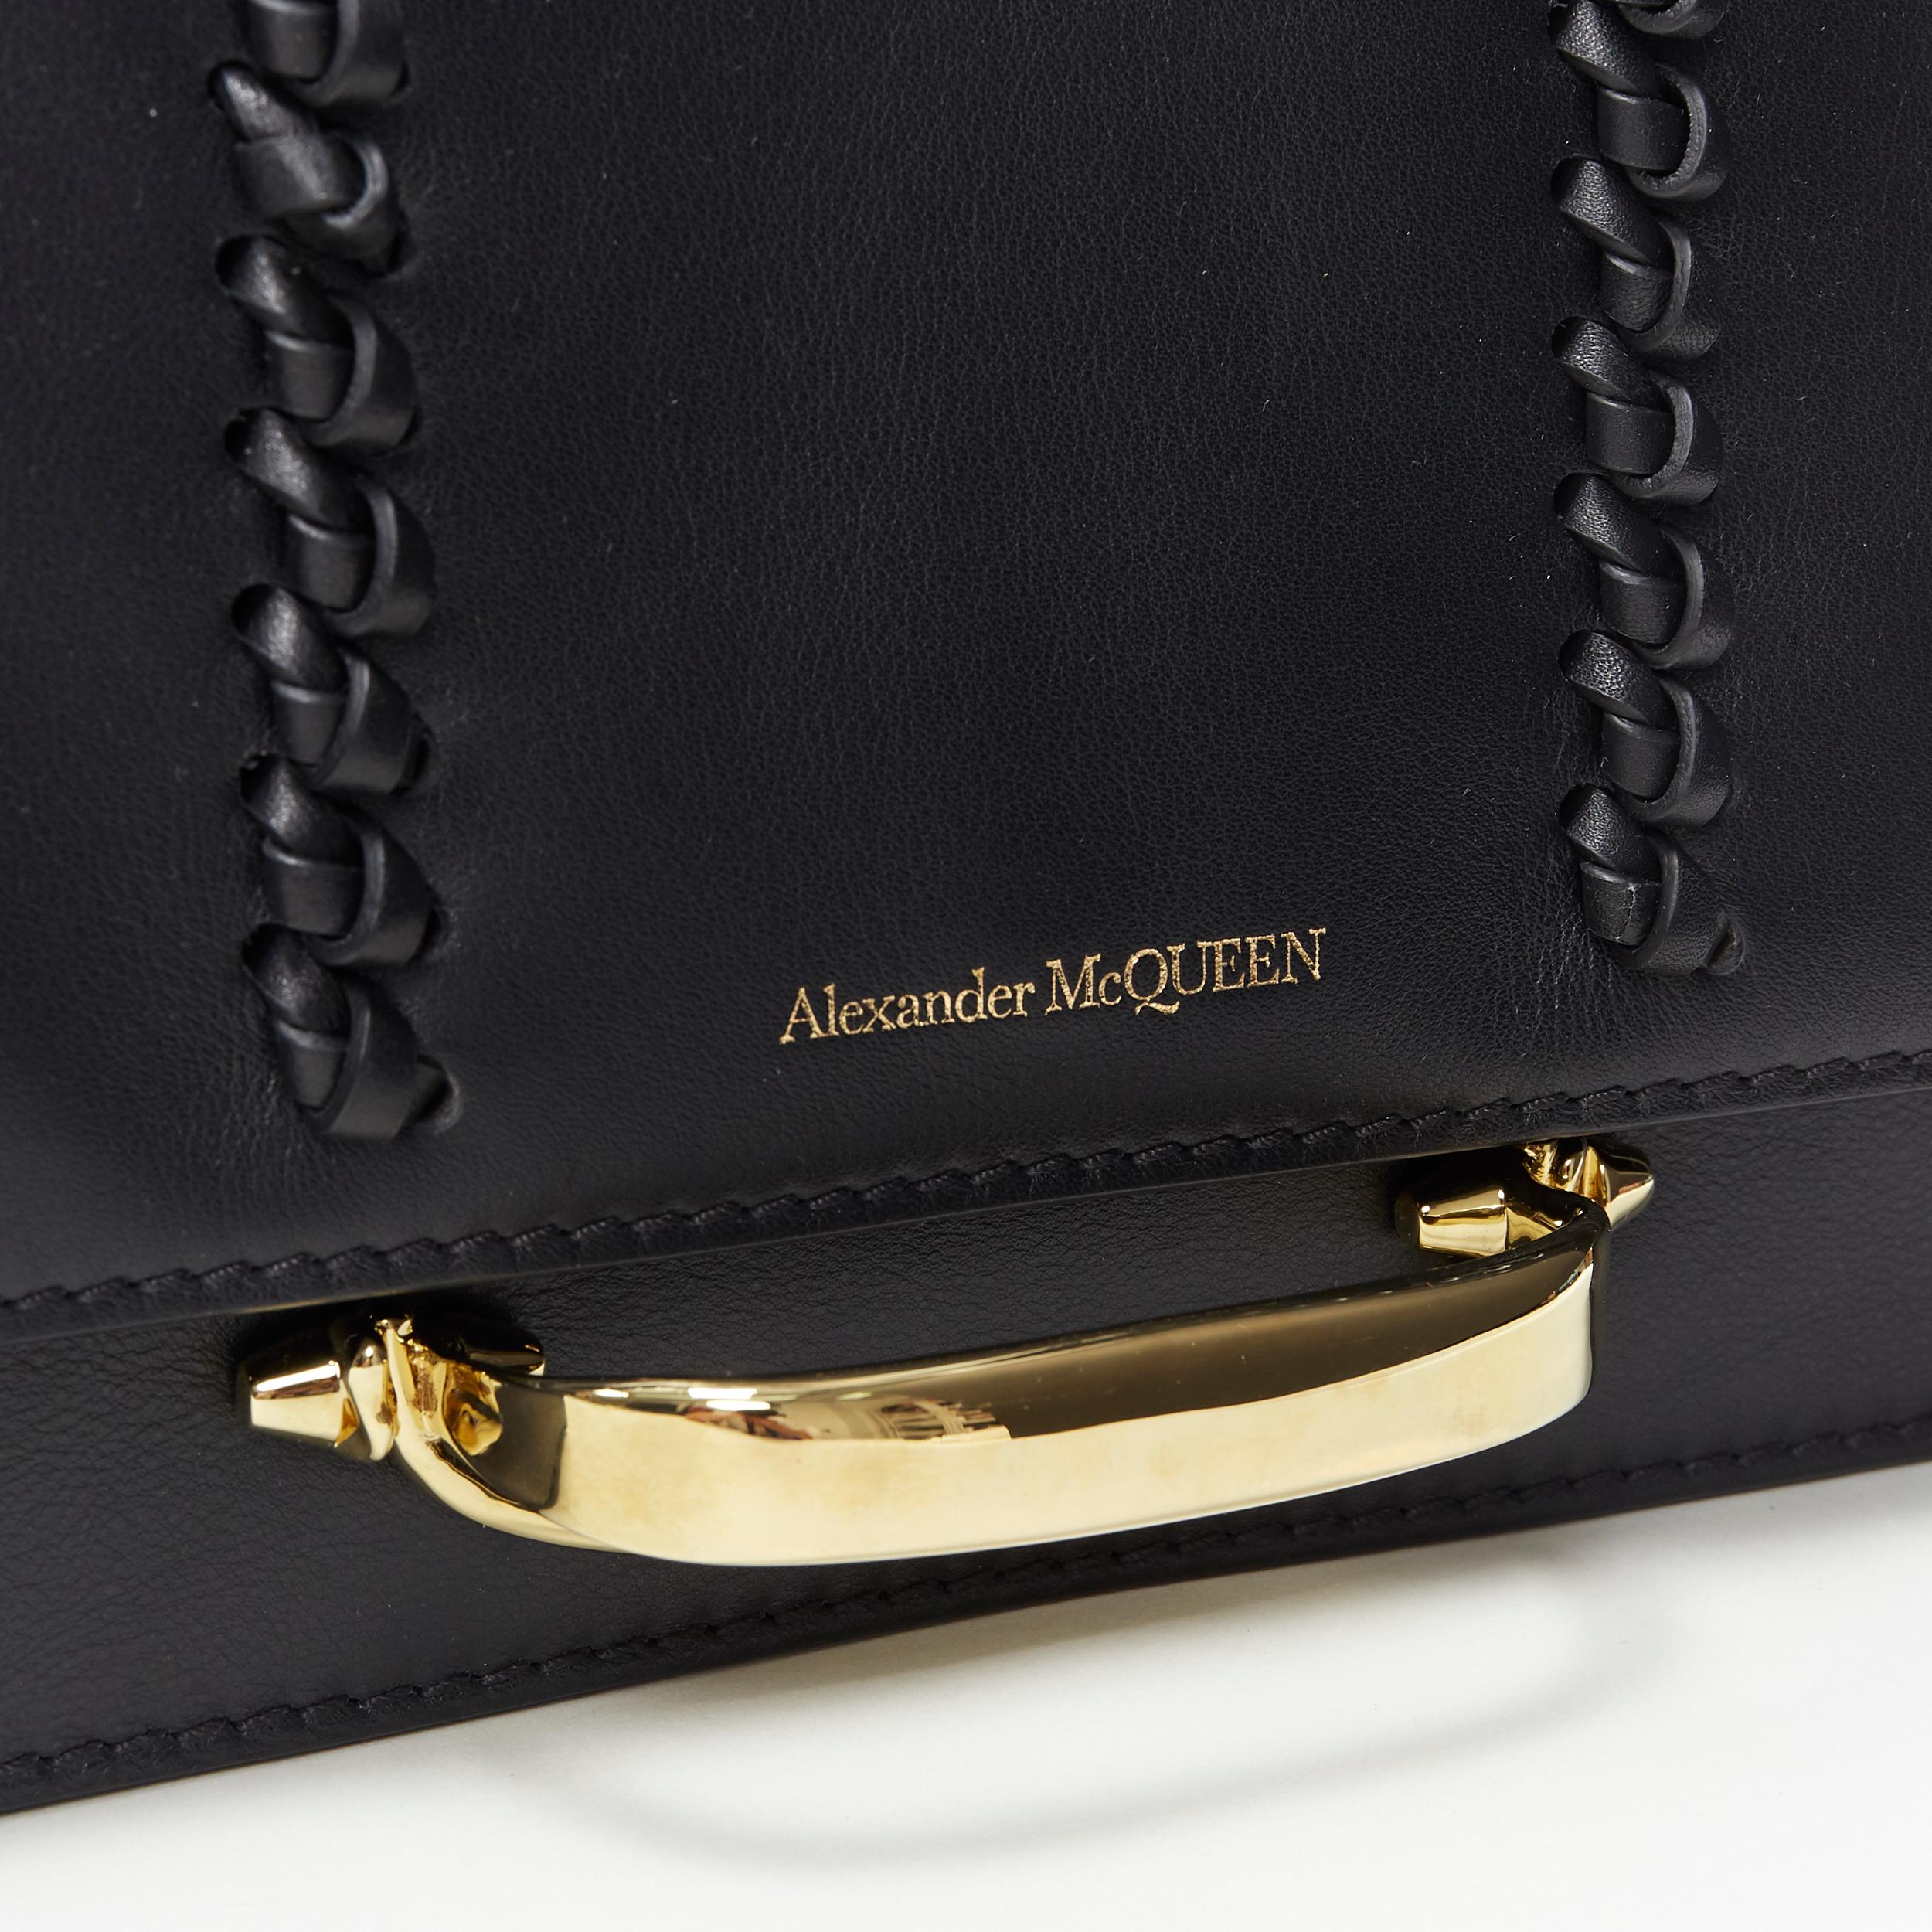 Women's new ALEXANDER MCQUEEN The Story black leather whipstitch gold knuckle chain bag